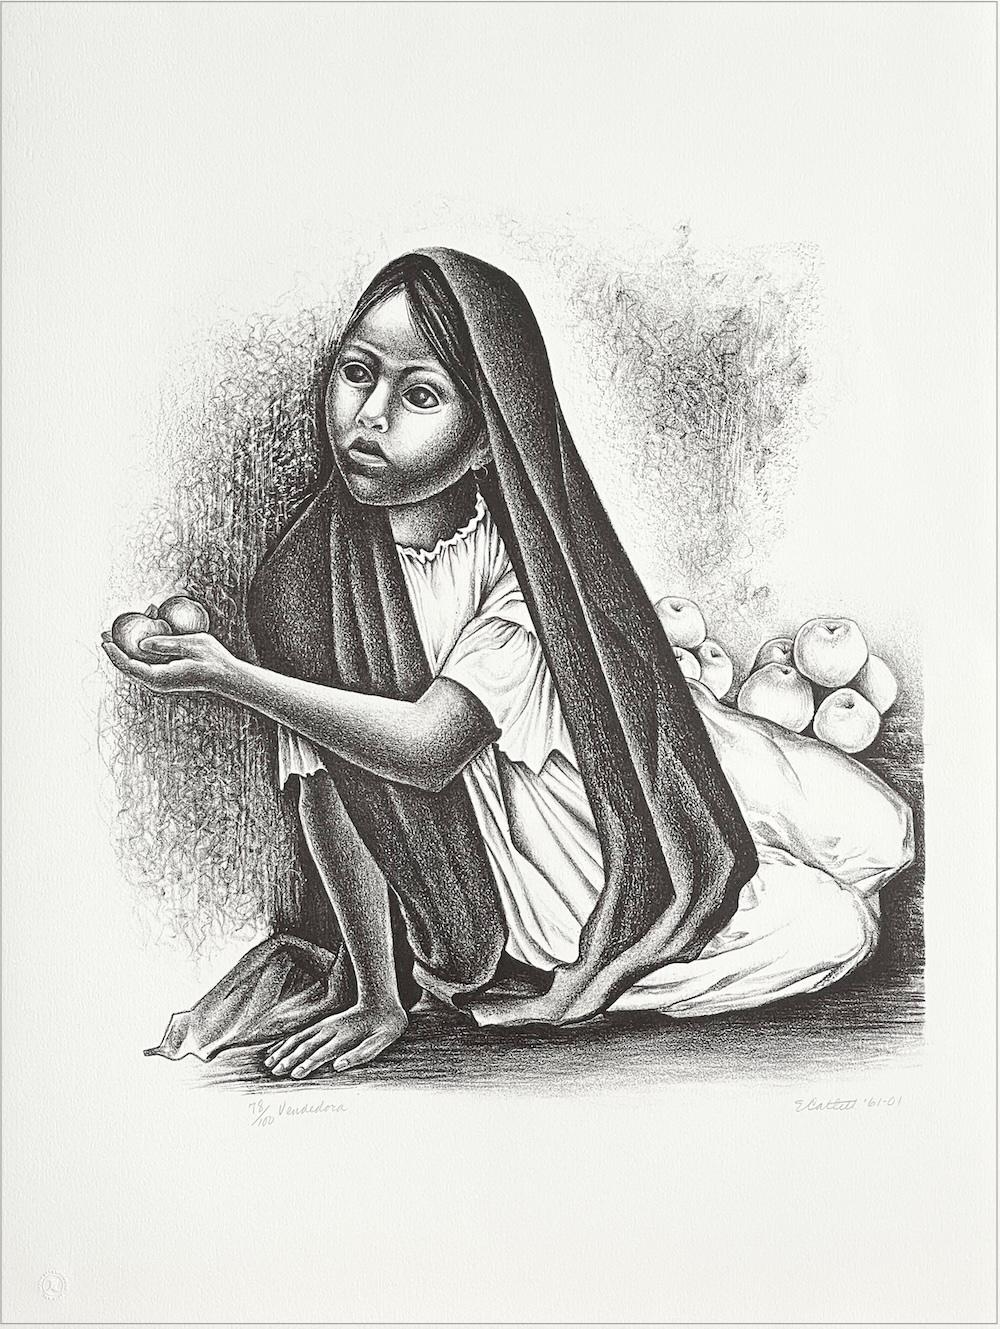 Elizabeth Catlett Portrait Print - VENDEDORA Signed Lithograph, Portrait Seated Young Girl, Mexican Fruit Seller